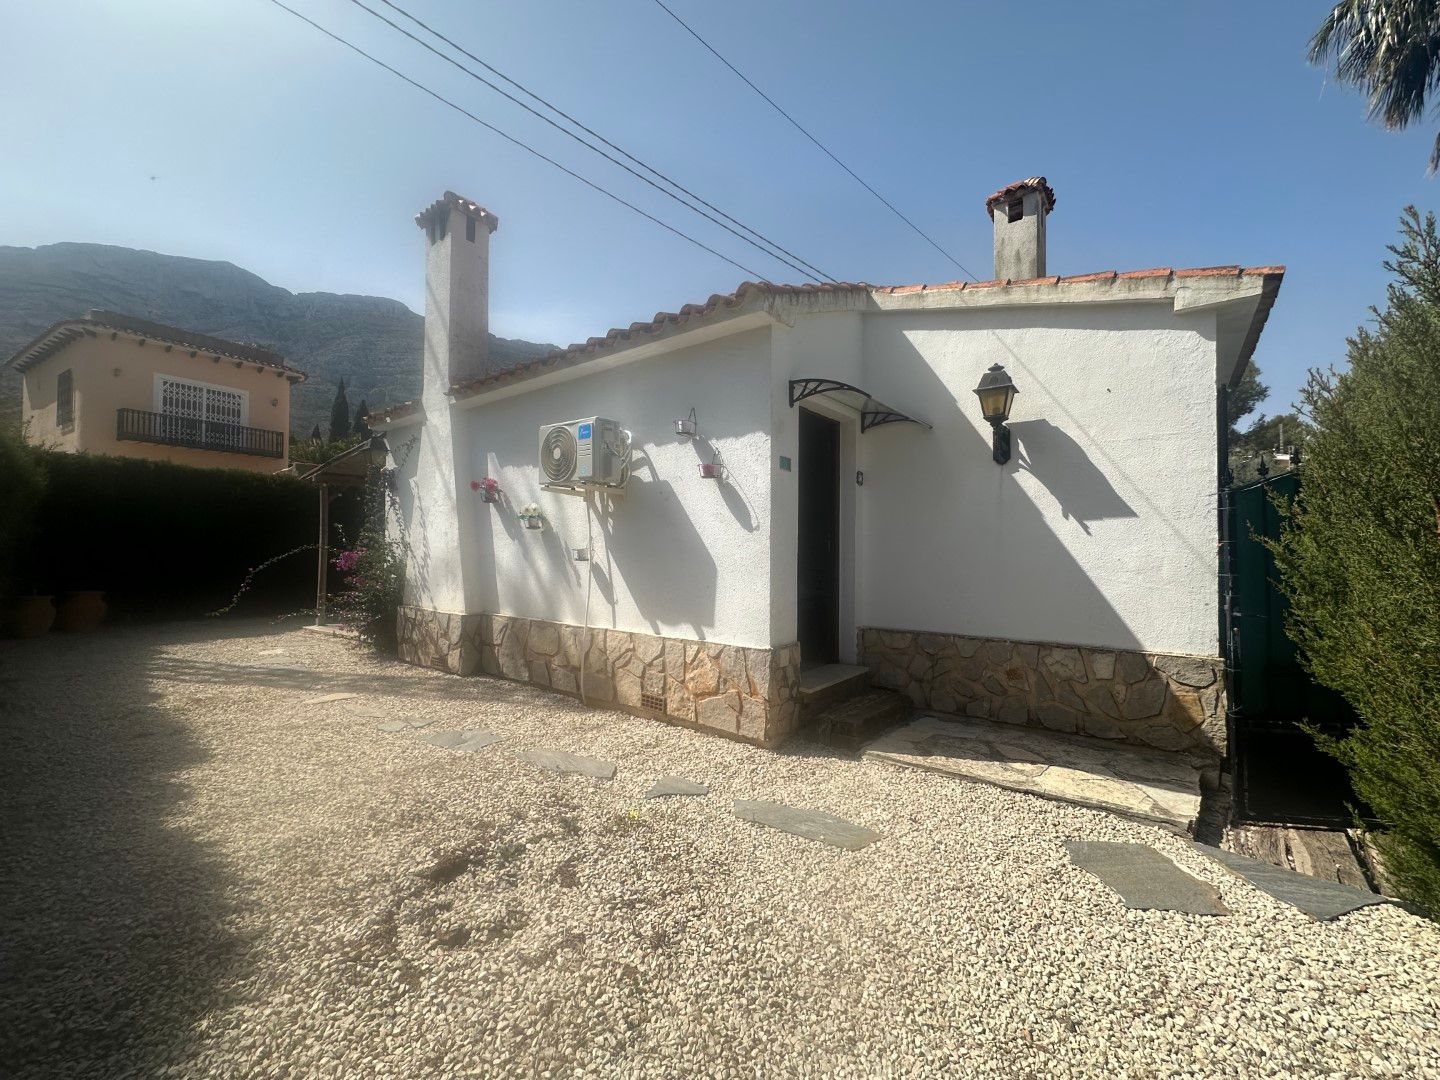 Villa for sale in Denia with 2 bedrooms and a private plot.